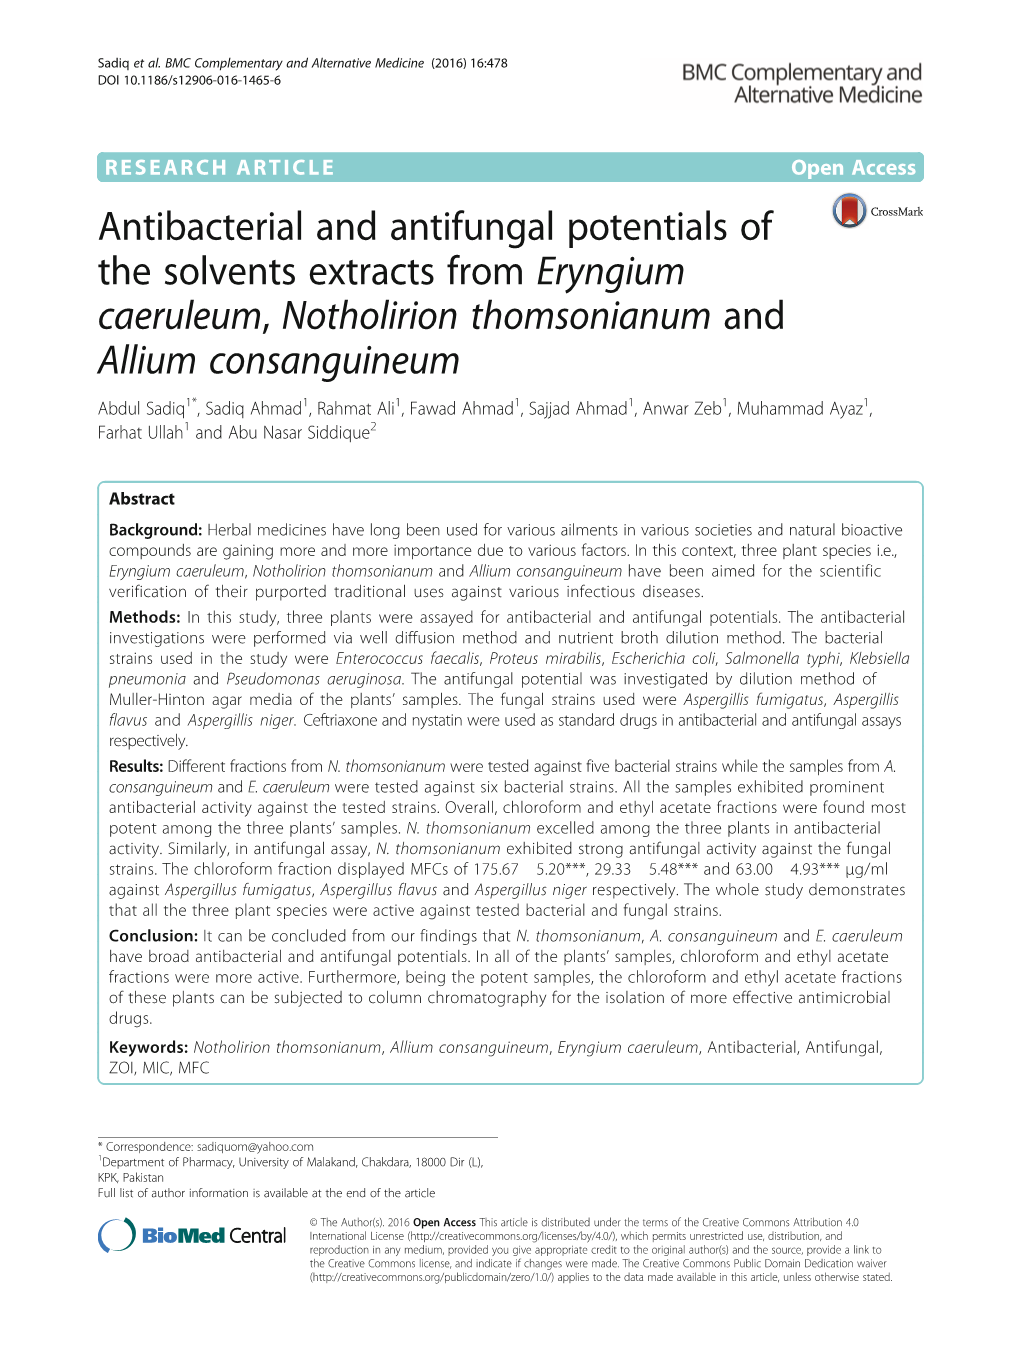 Antibacterial and Antifungal Potentials of the Solvents Extracts From